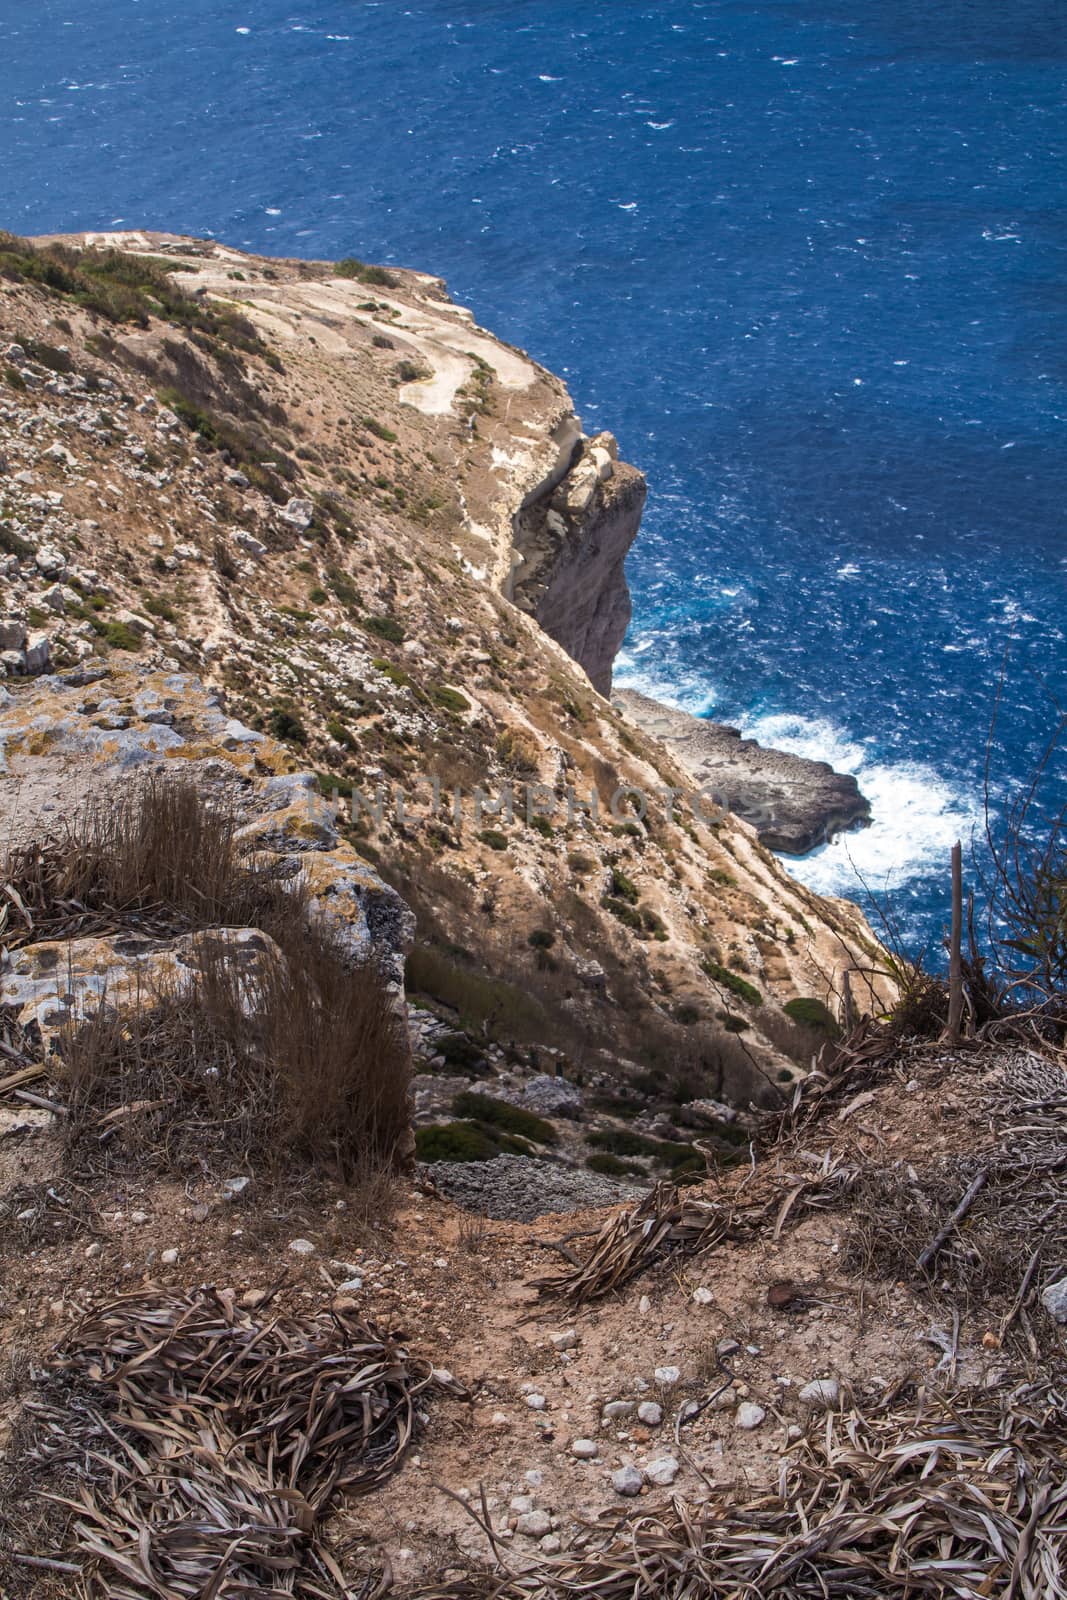 Dingli Cliffs, one of the most beautiful parts of the shore at the island Malta. Water of the Mediterranean sea.